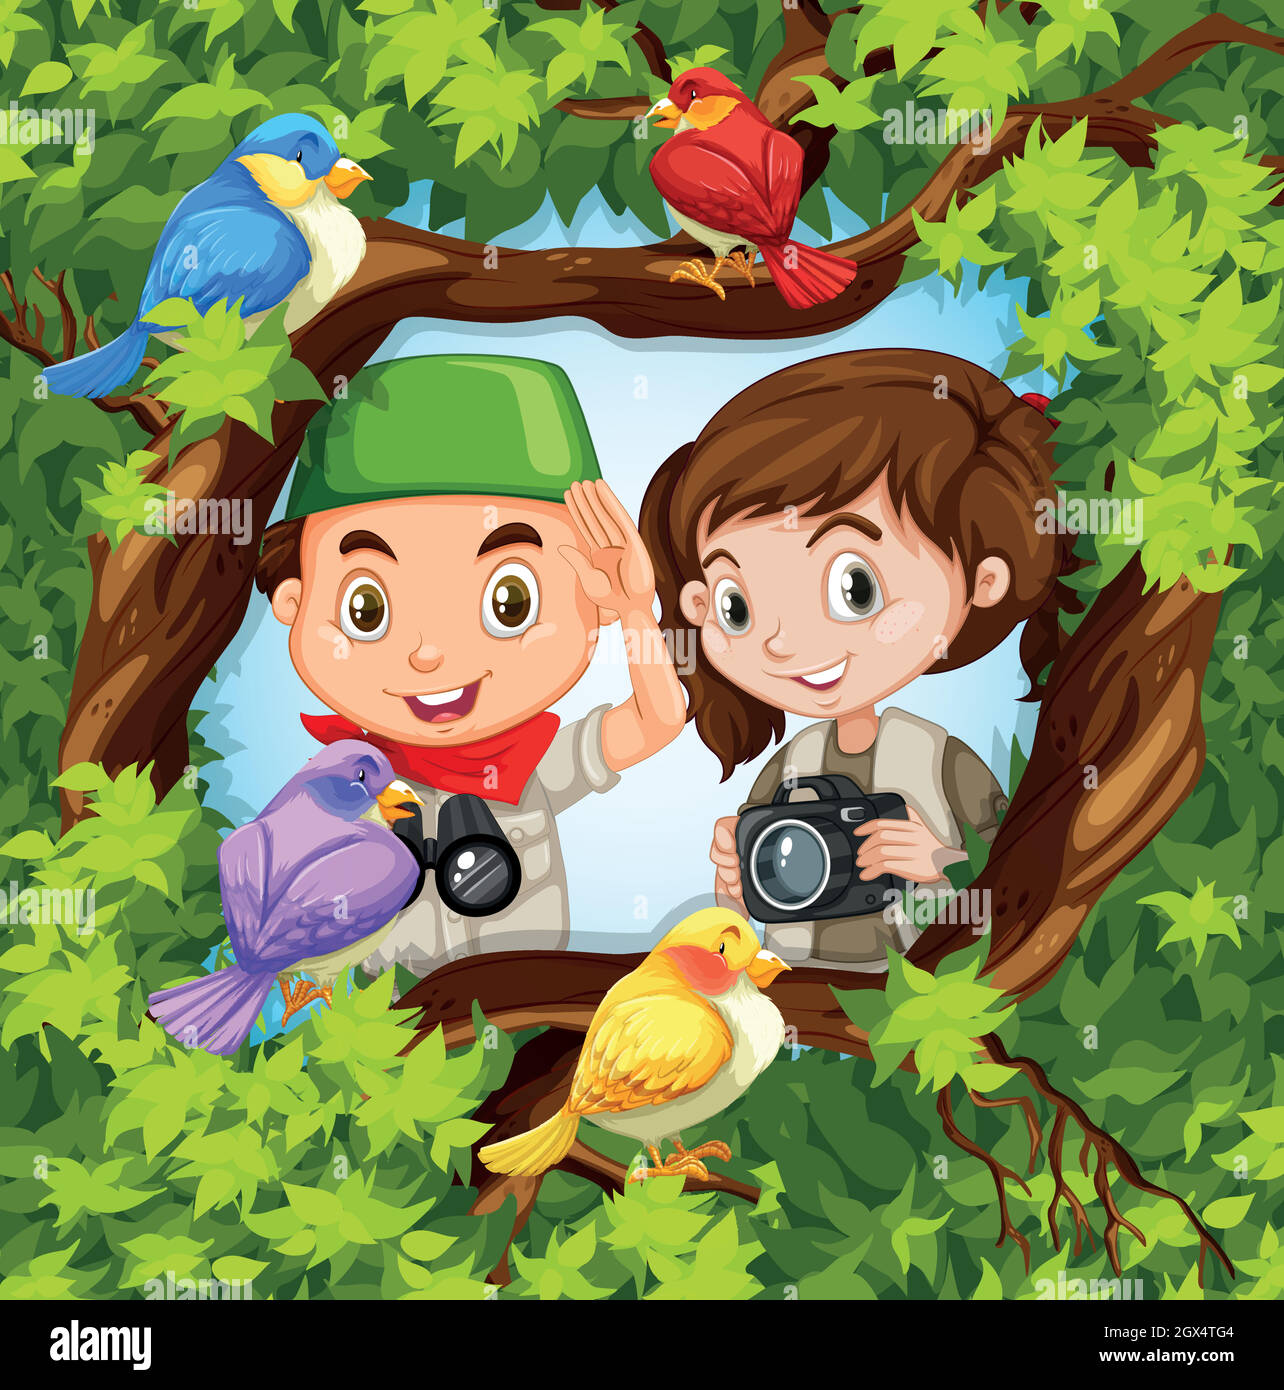 Bird watching with boy and girl Stock Vector